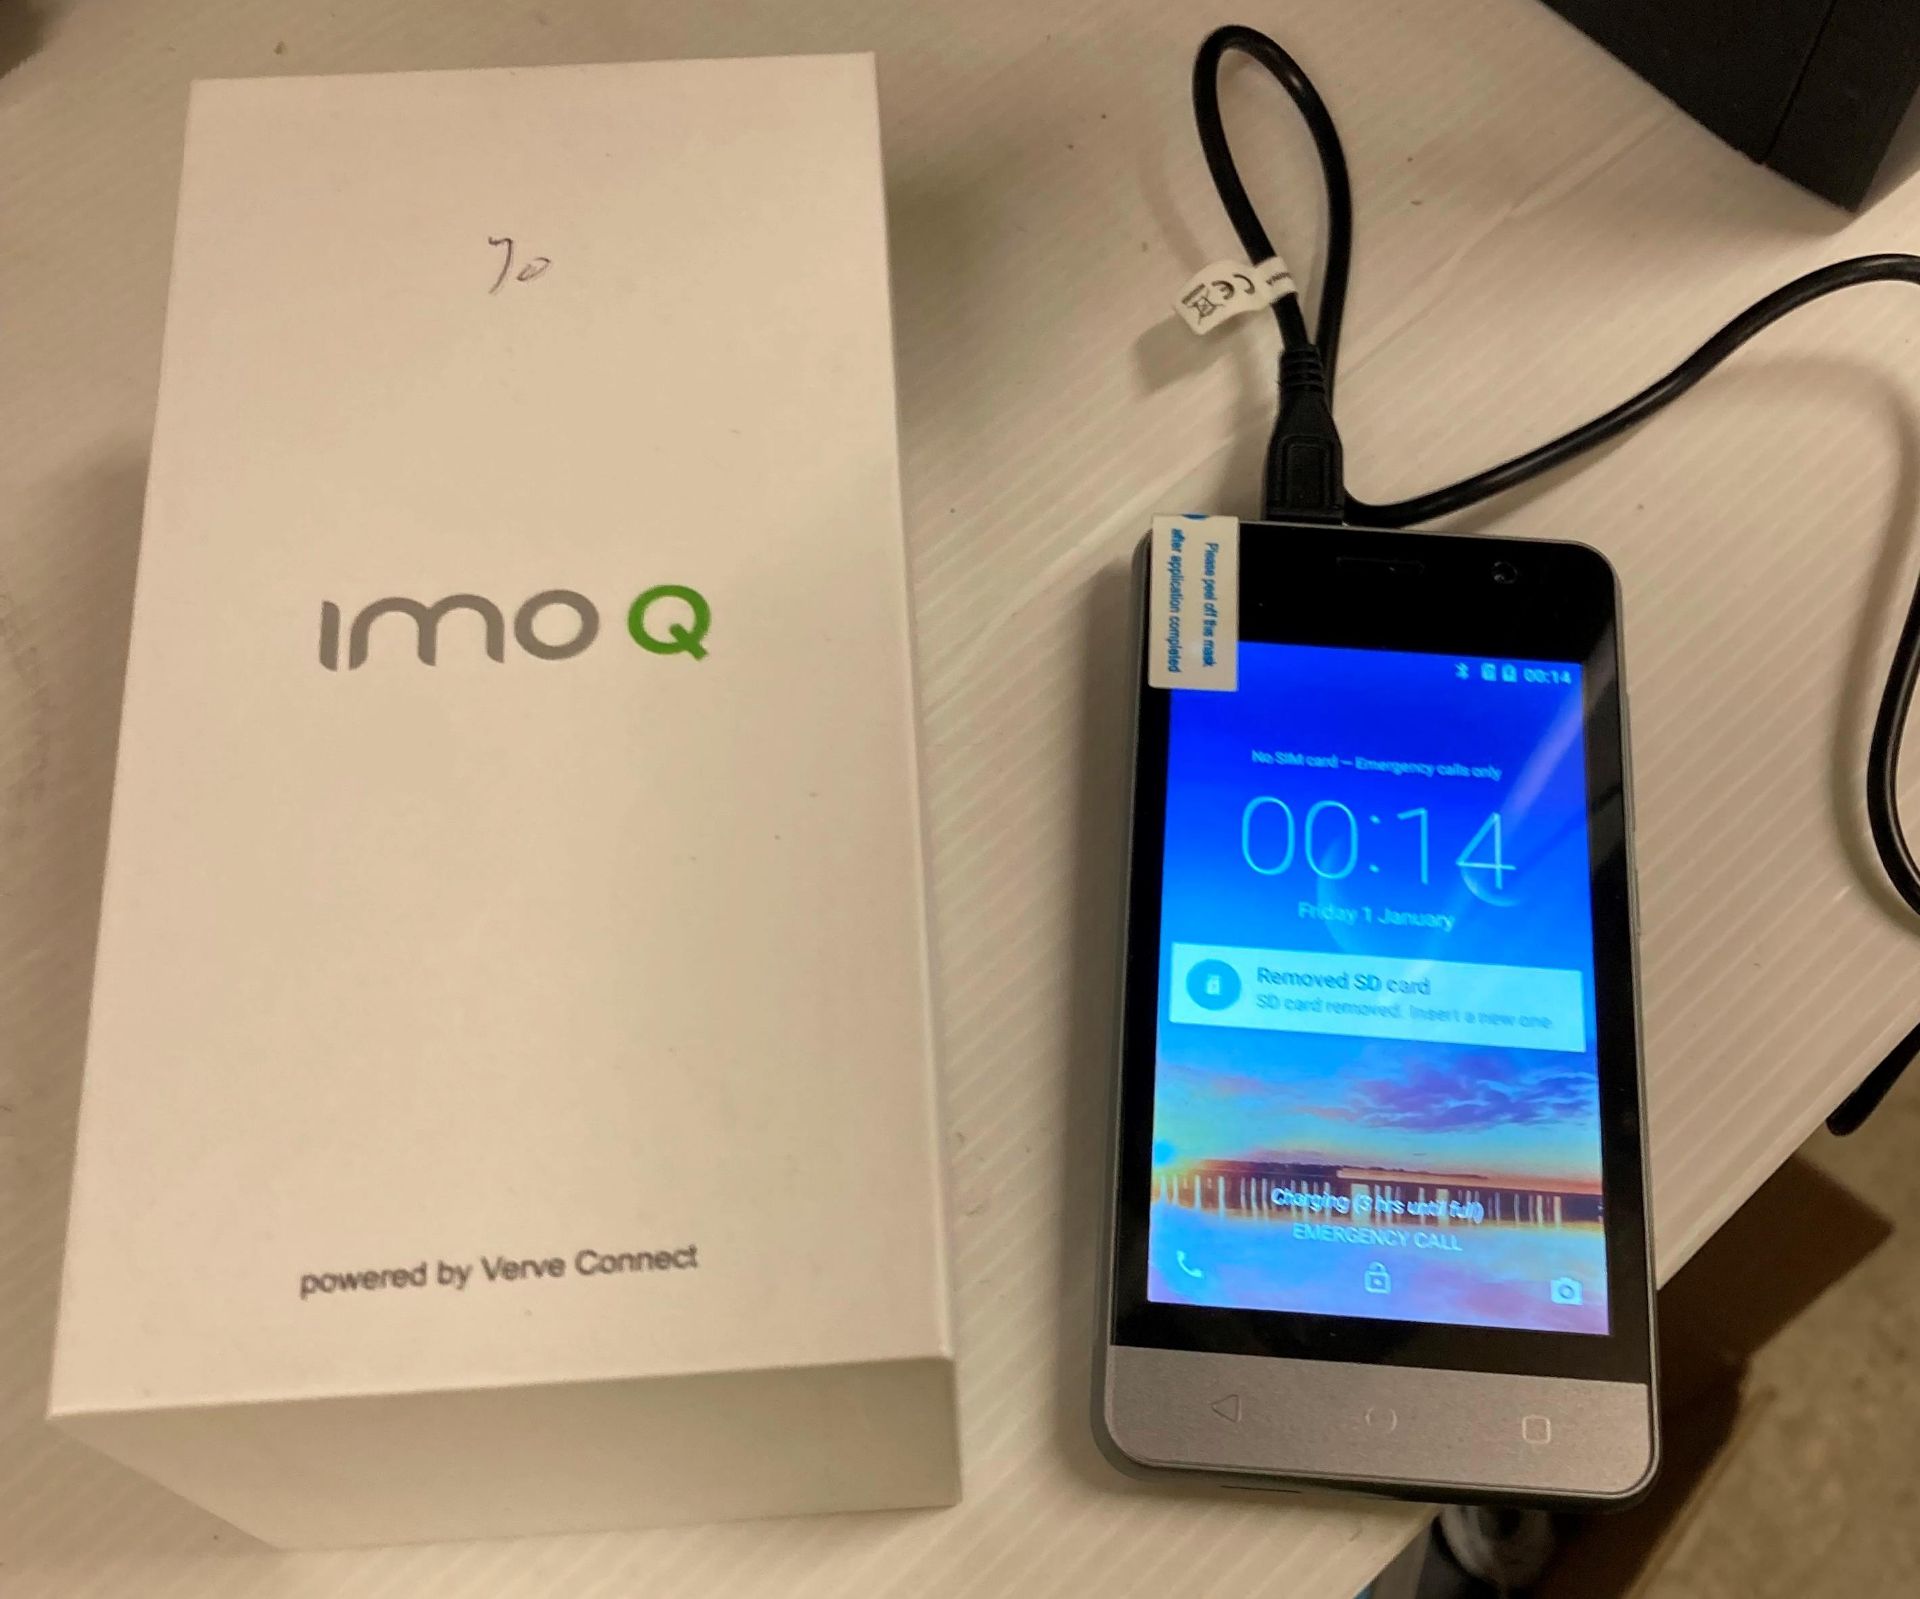 6 x Imo Q Mobile Phones Boxed - some may not have chargers (Saleroom location: G07)